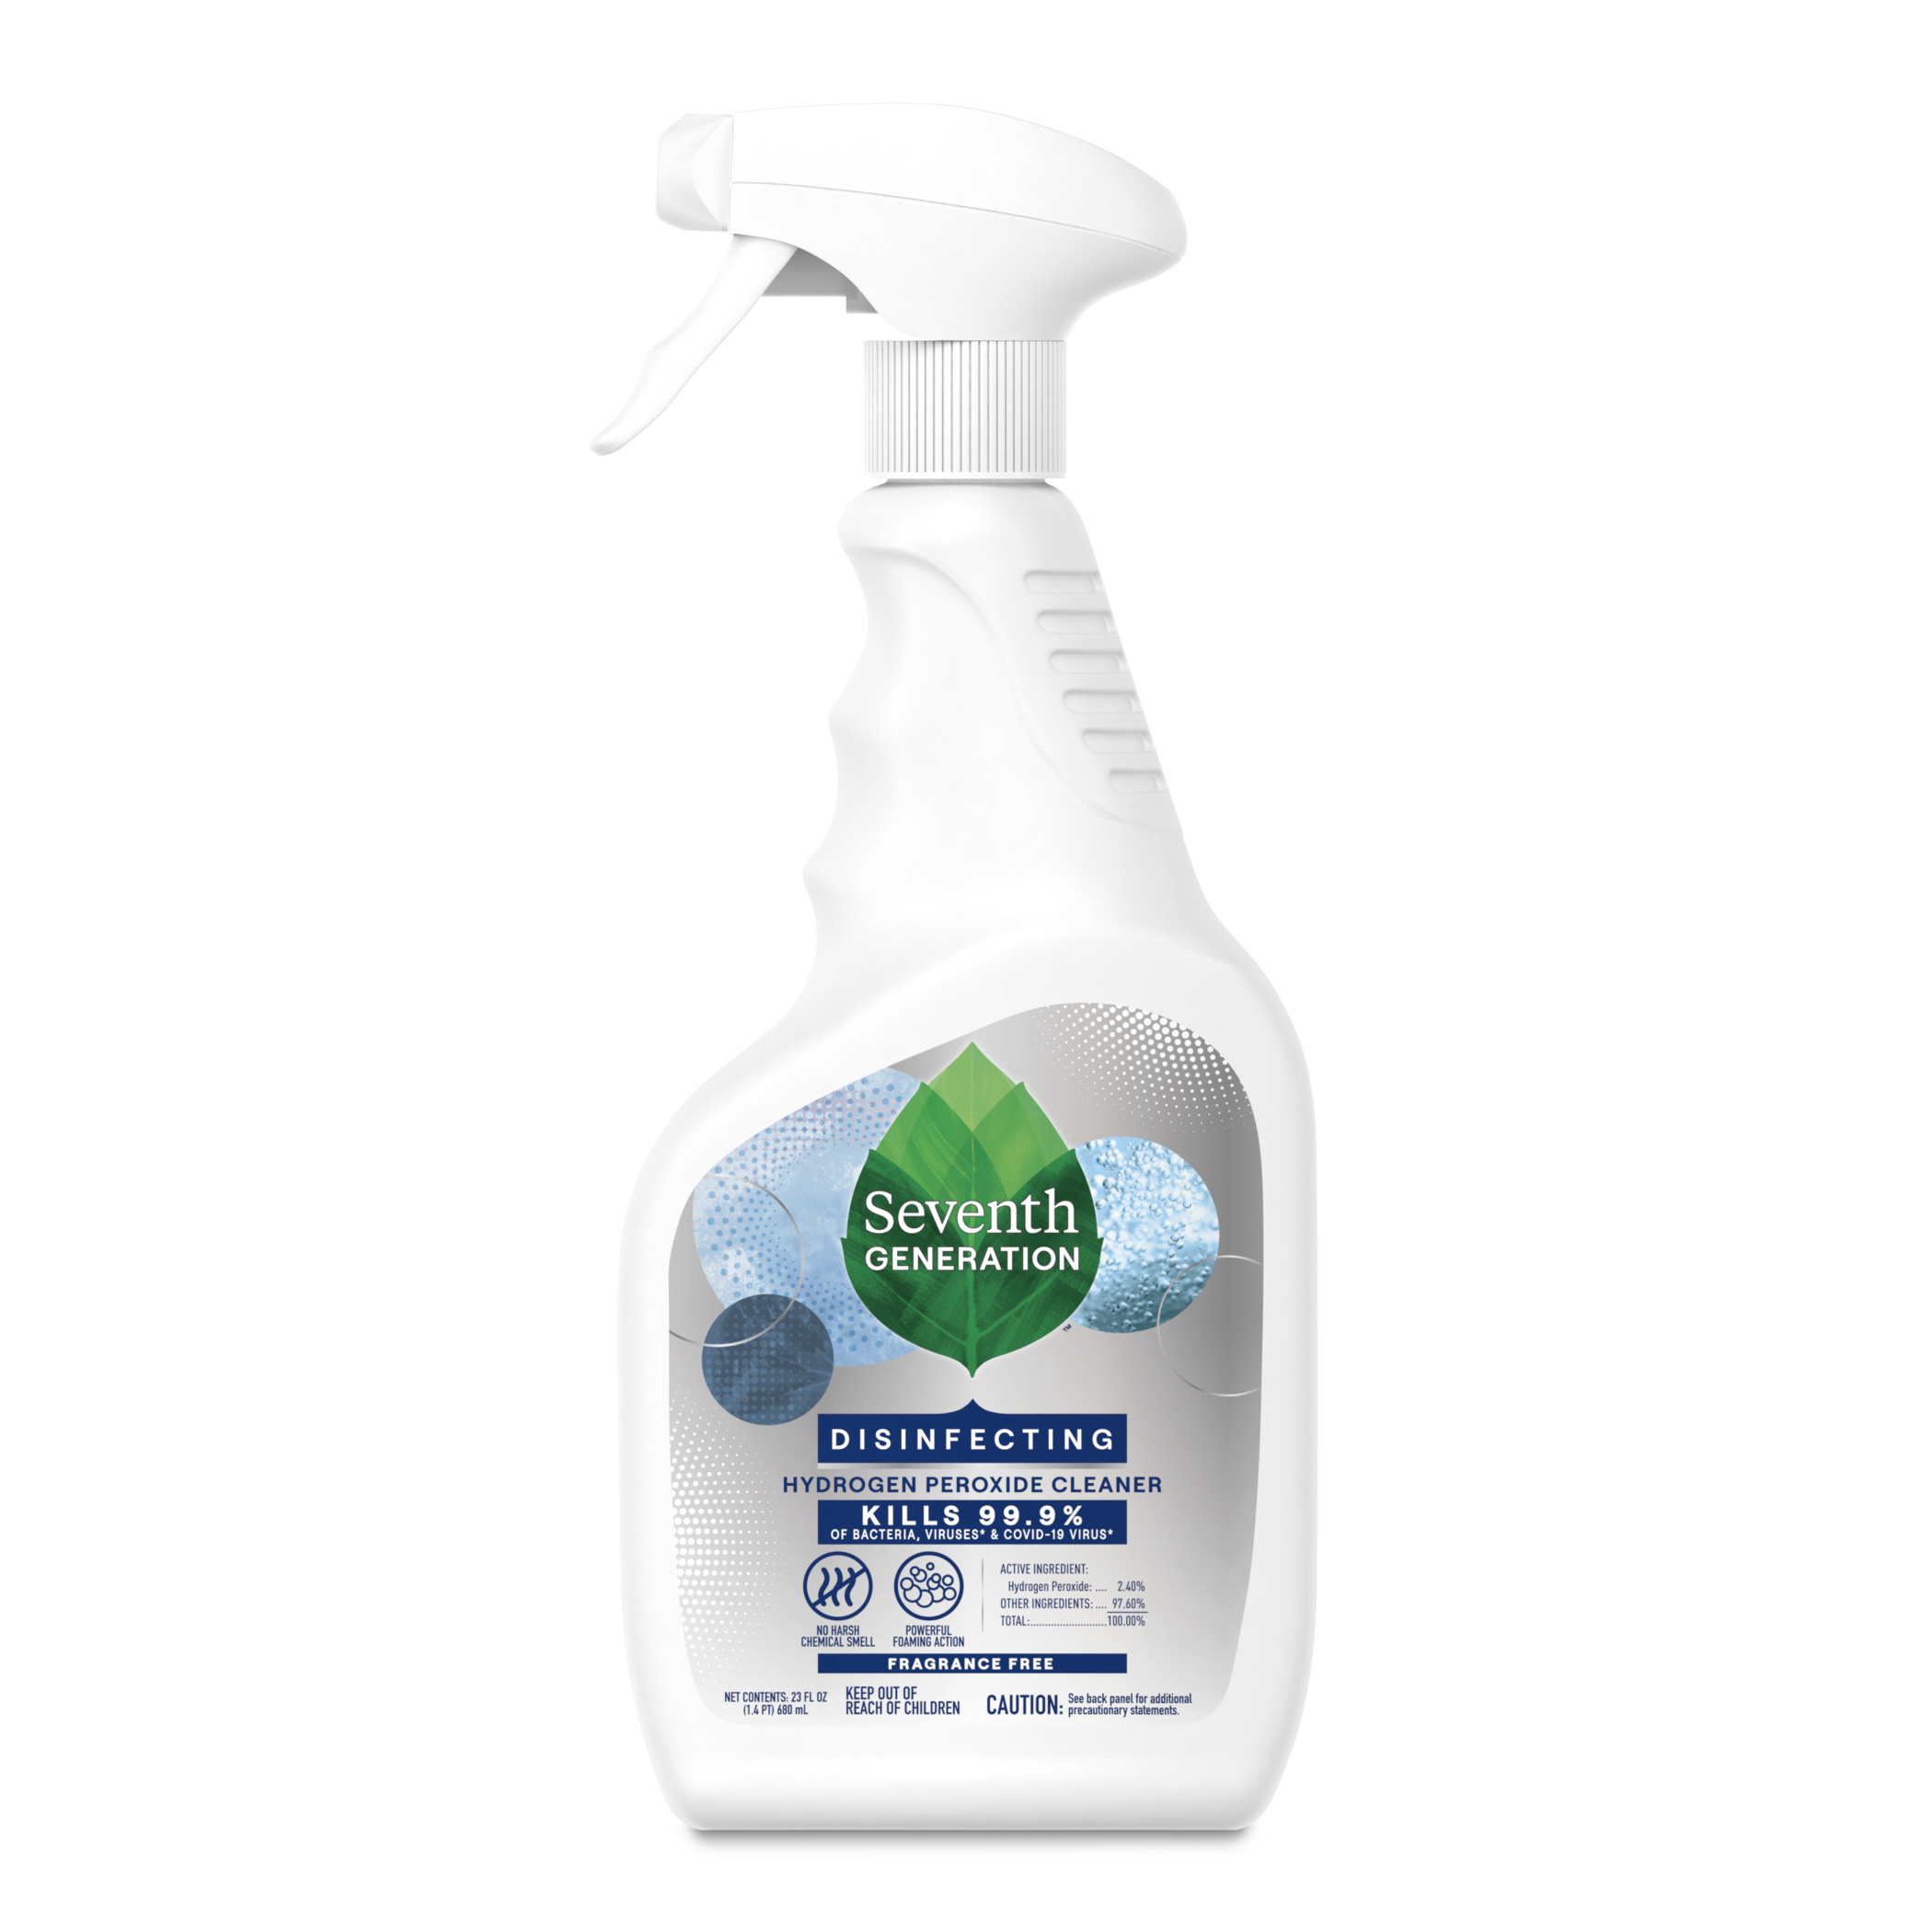 6 PCK - ProClean Hard Water Spots Remover , Glass stains and spot Remover